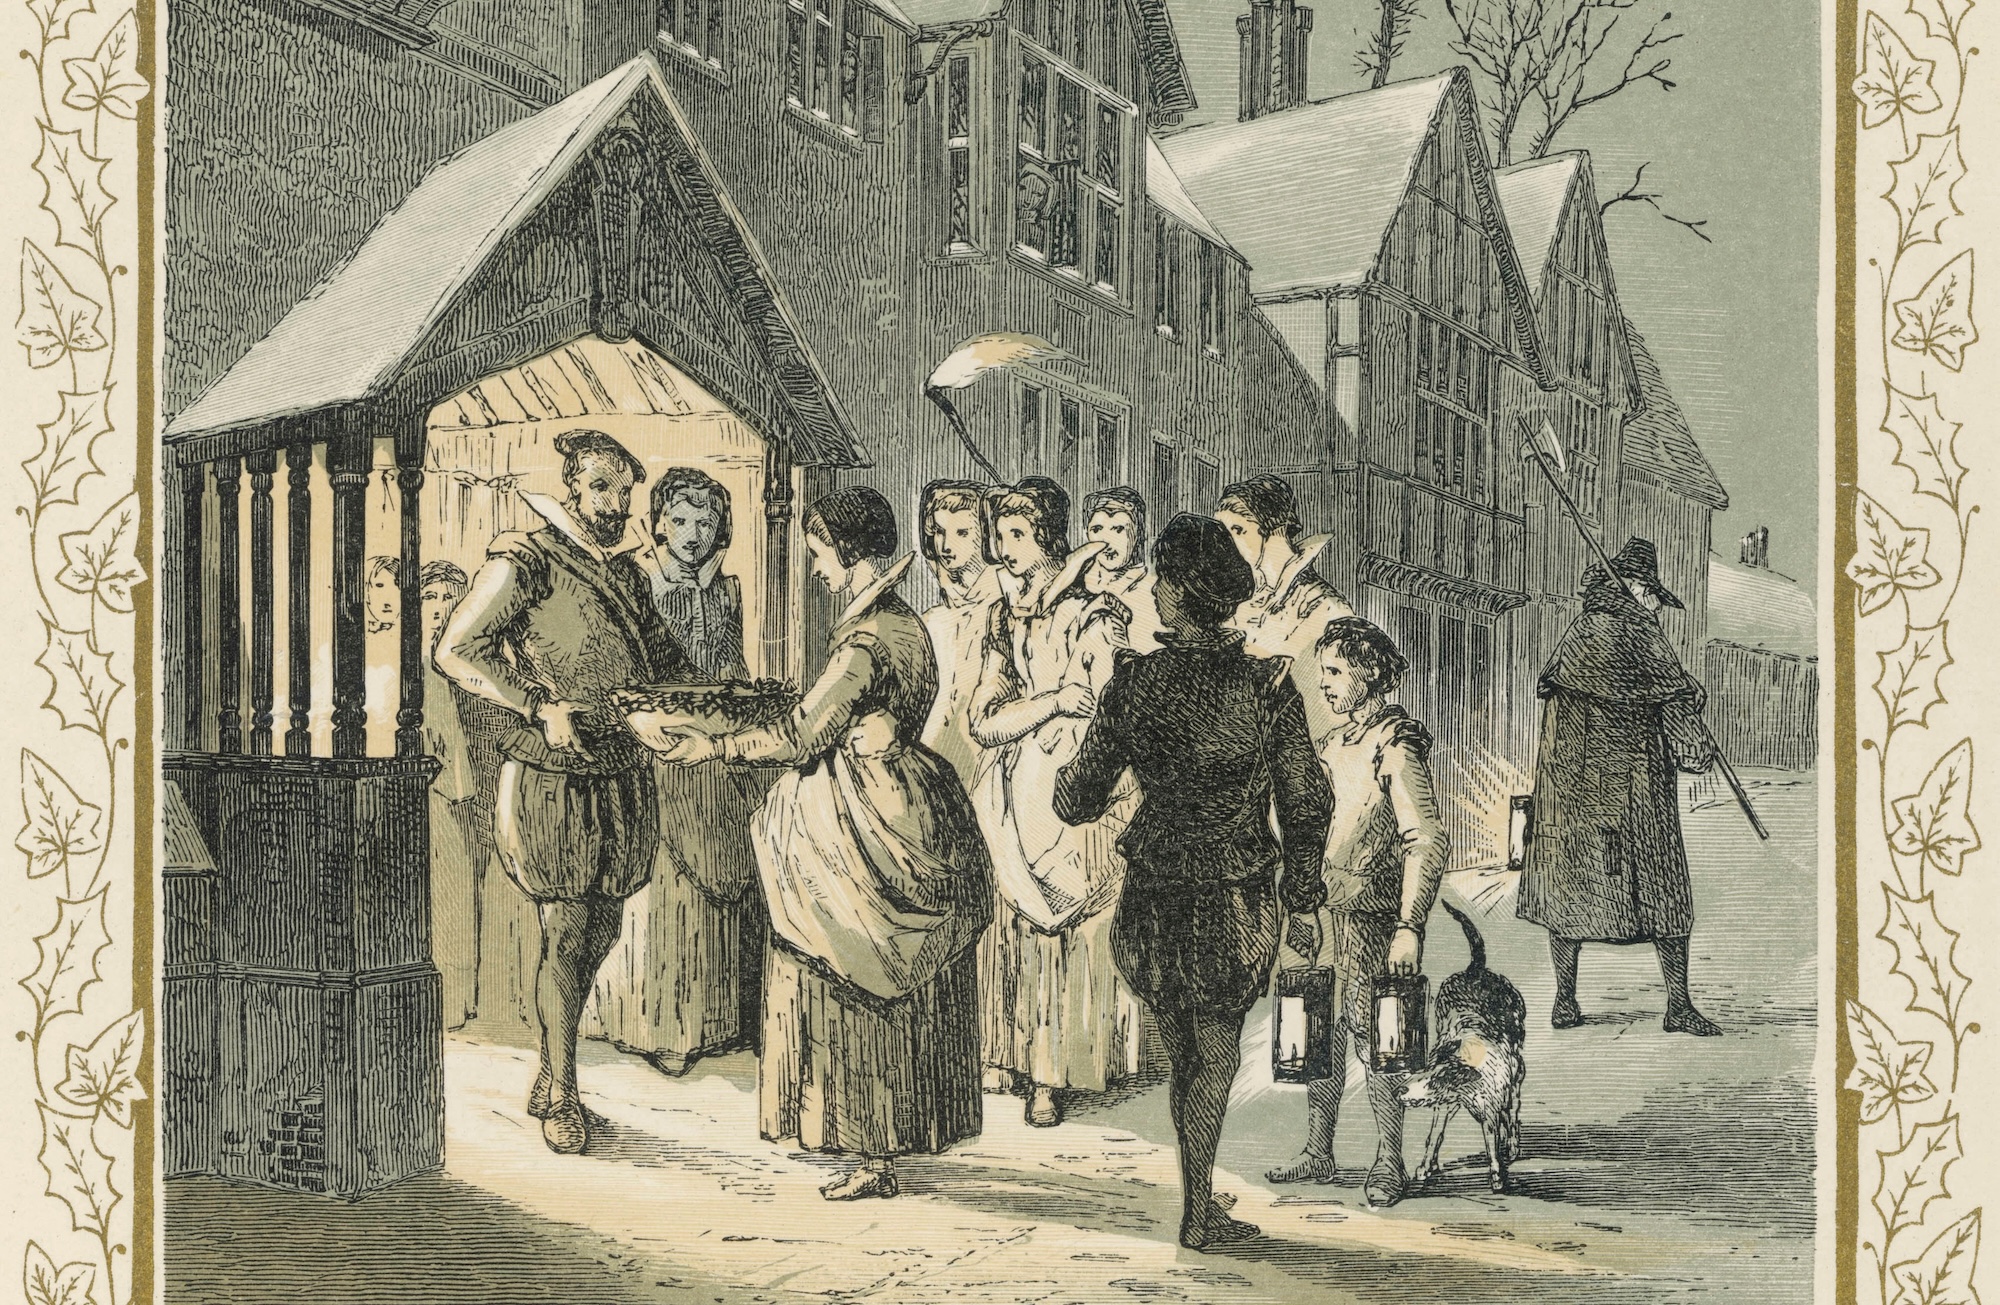 Wassailing: Carol singers rewarded with the wassail bowl.. Date: 16th/17th century